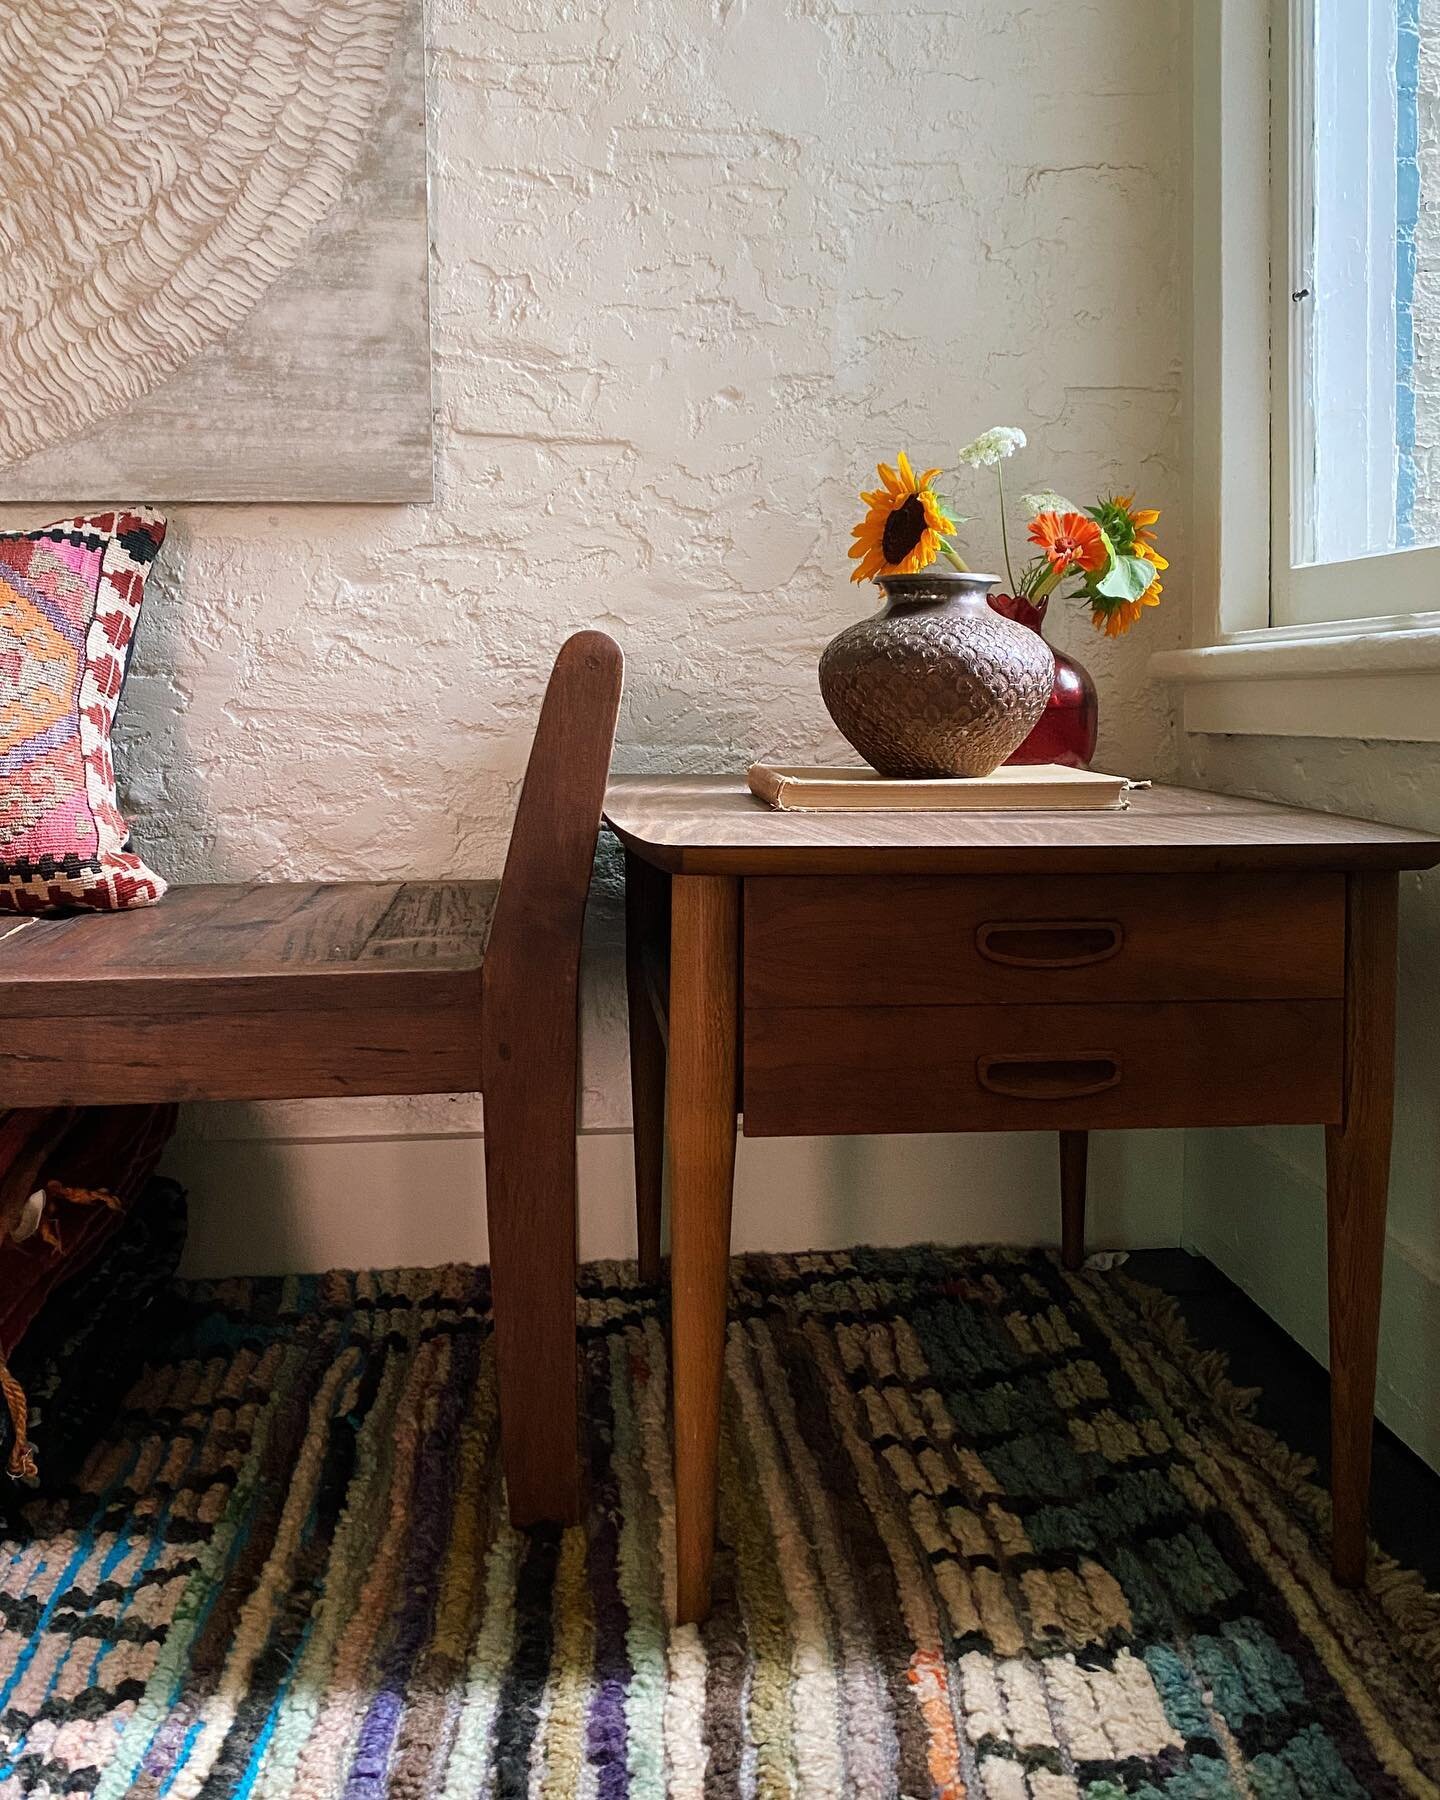 Mid-Century End Tables by Lane
Teak Bench 
Wood Carved Art by Eric Archer
Moroccan Rug 

The Rug Shop ~ 190 Main St, Saugerties 
#saugerties #saugertiesny #hudsonvalleyny #hudsonvalleyhomes #upstatehouse #hudsonvalleyrealestate